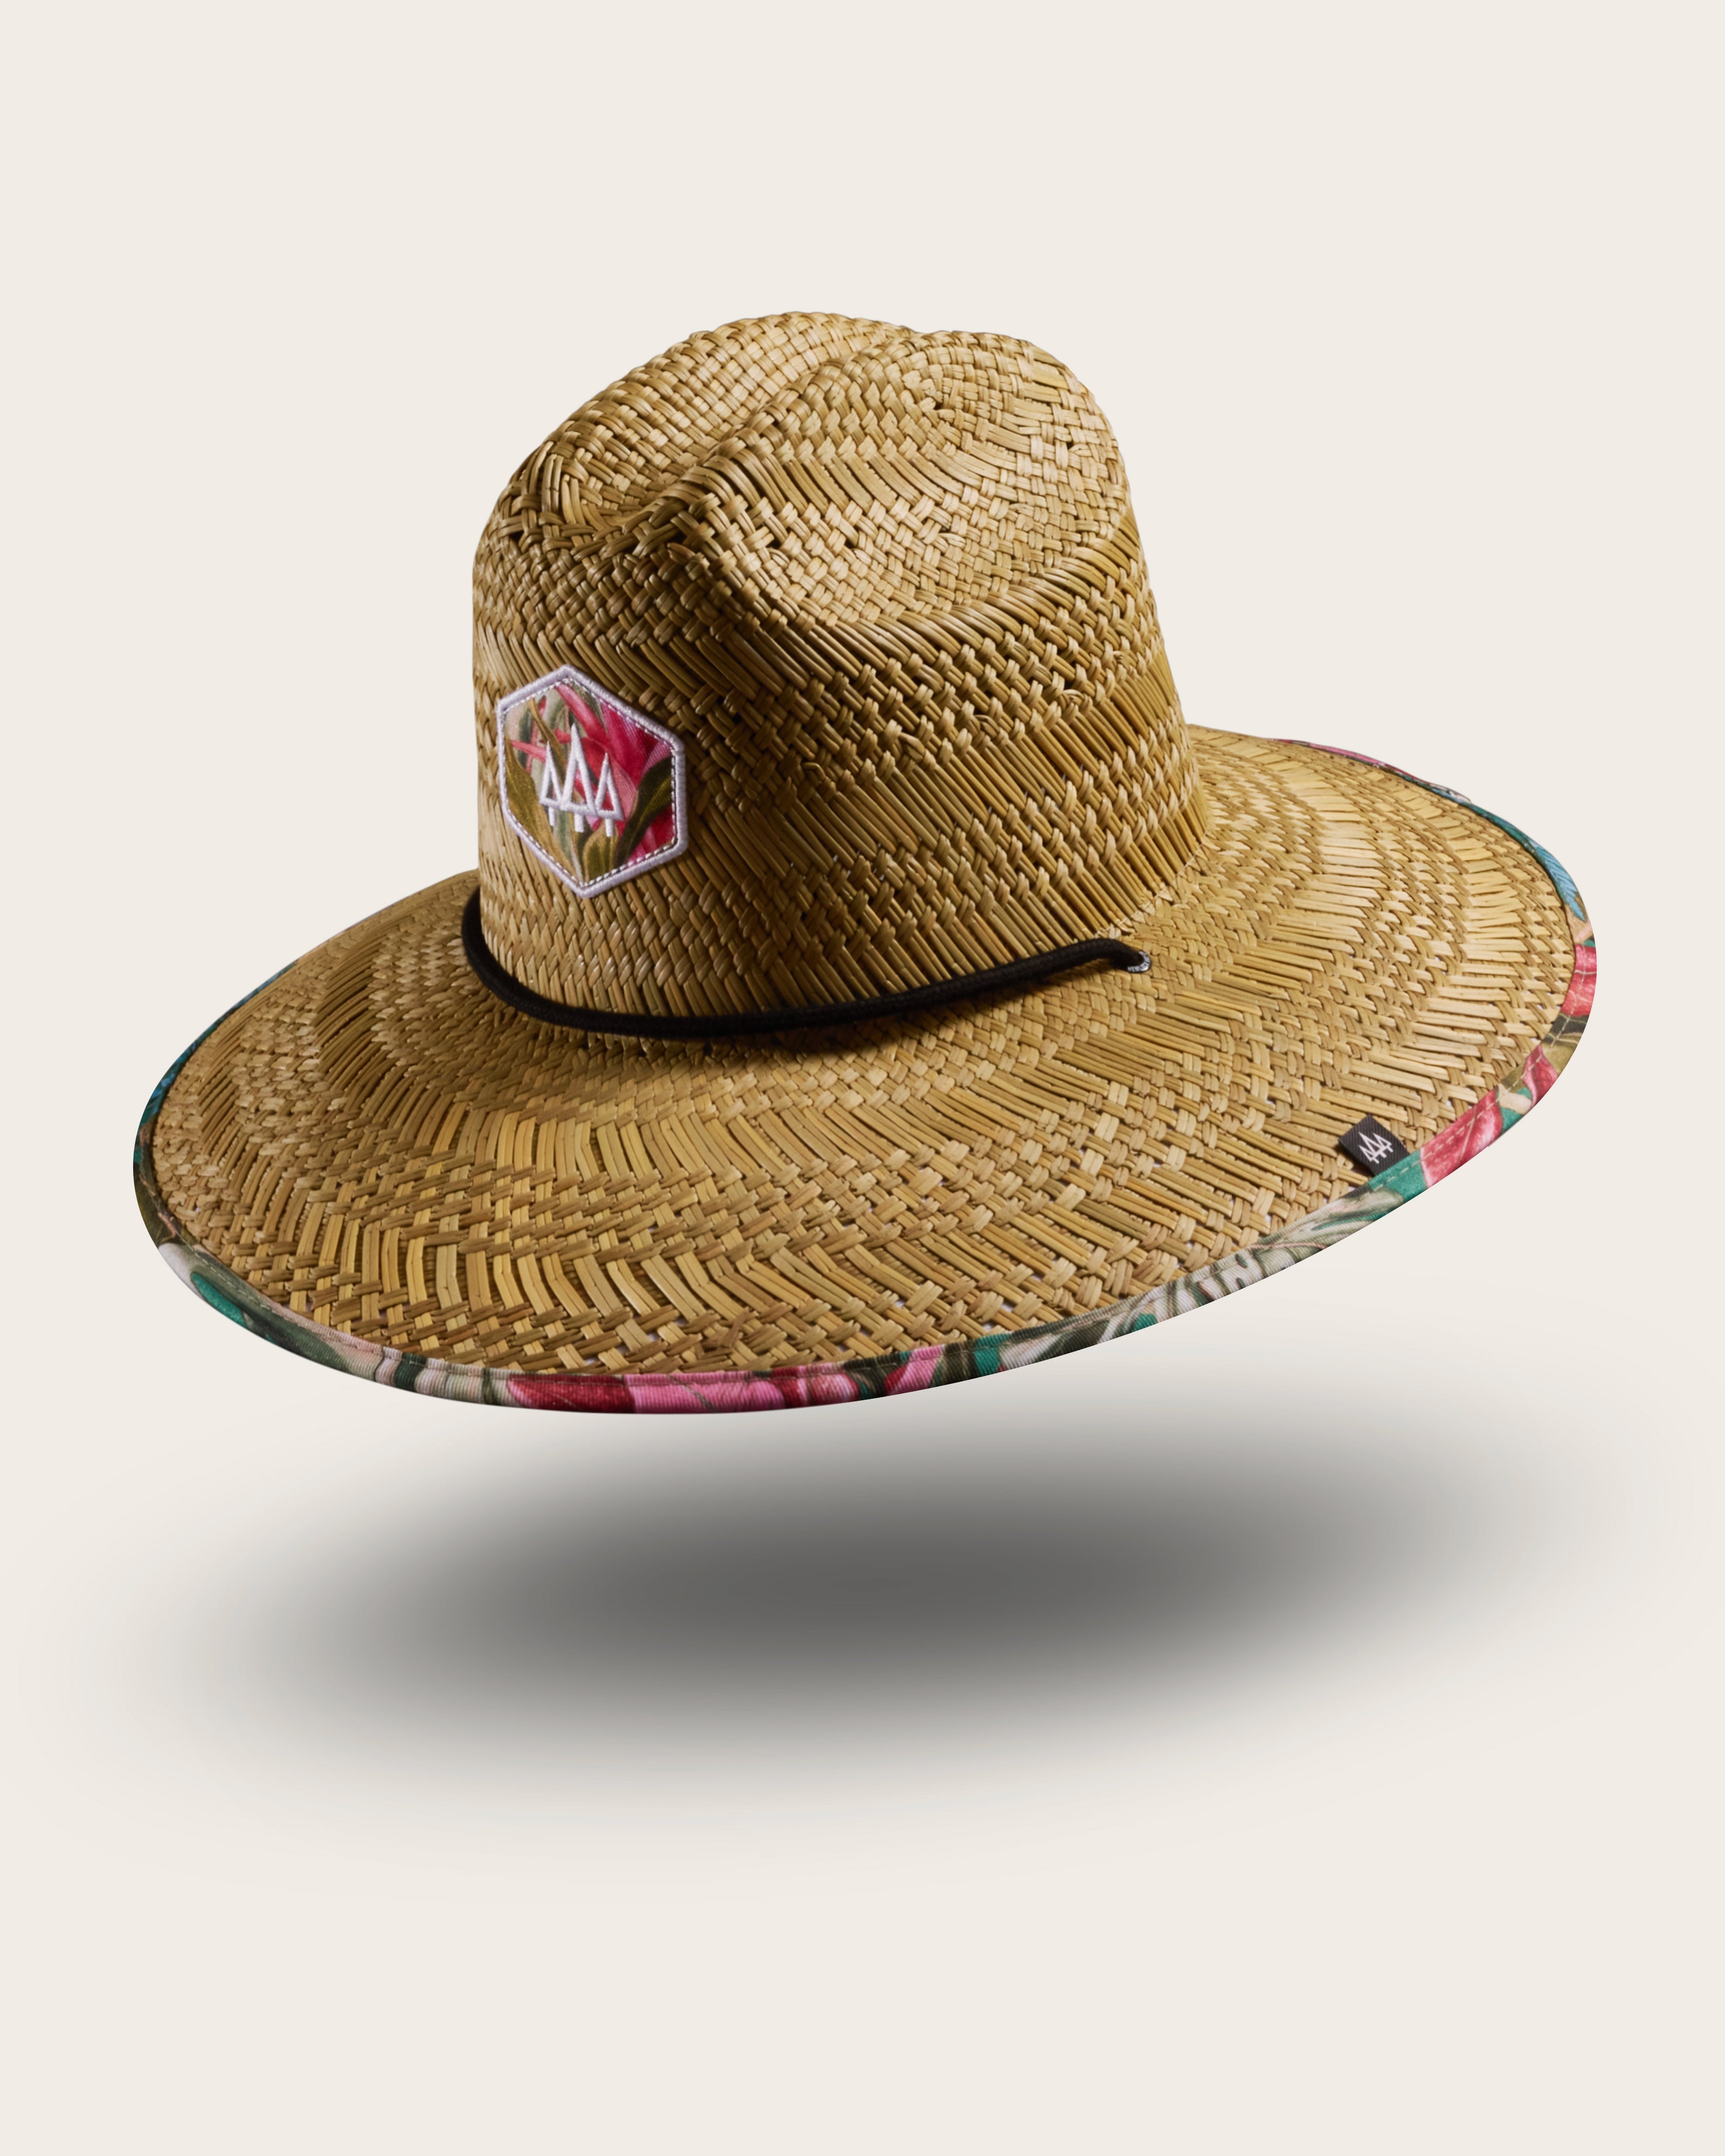 Hemlock Bombay straw lifeguard hat with panther pattern with patch